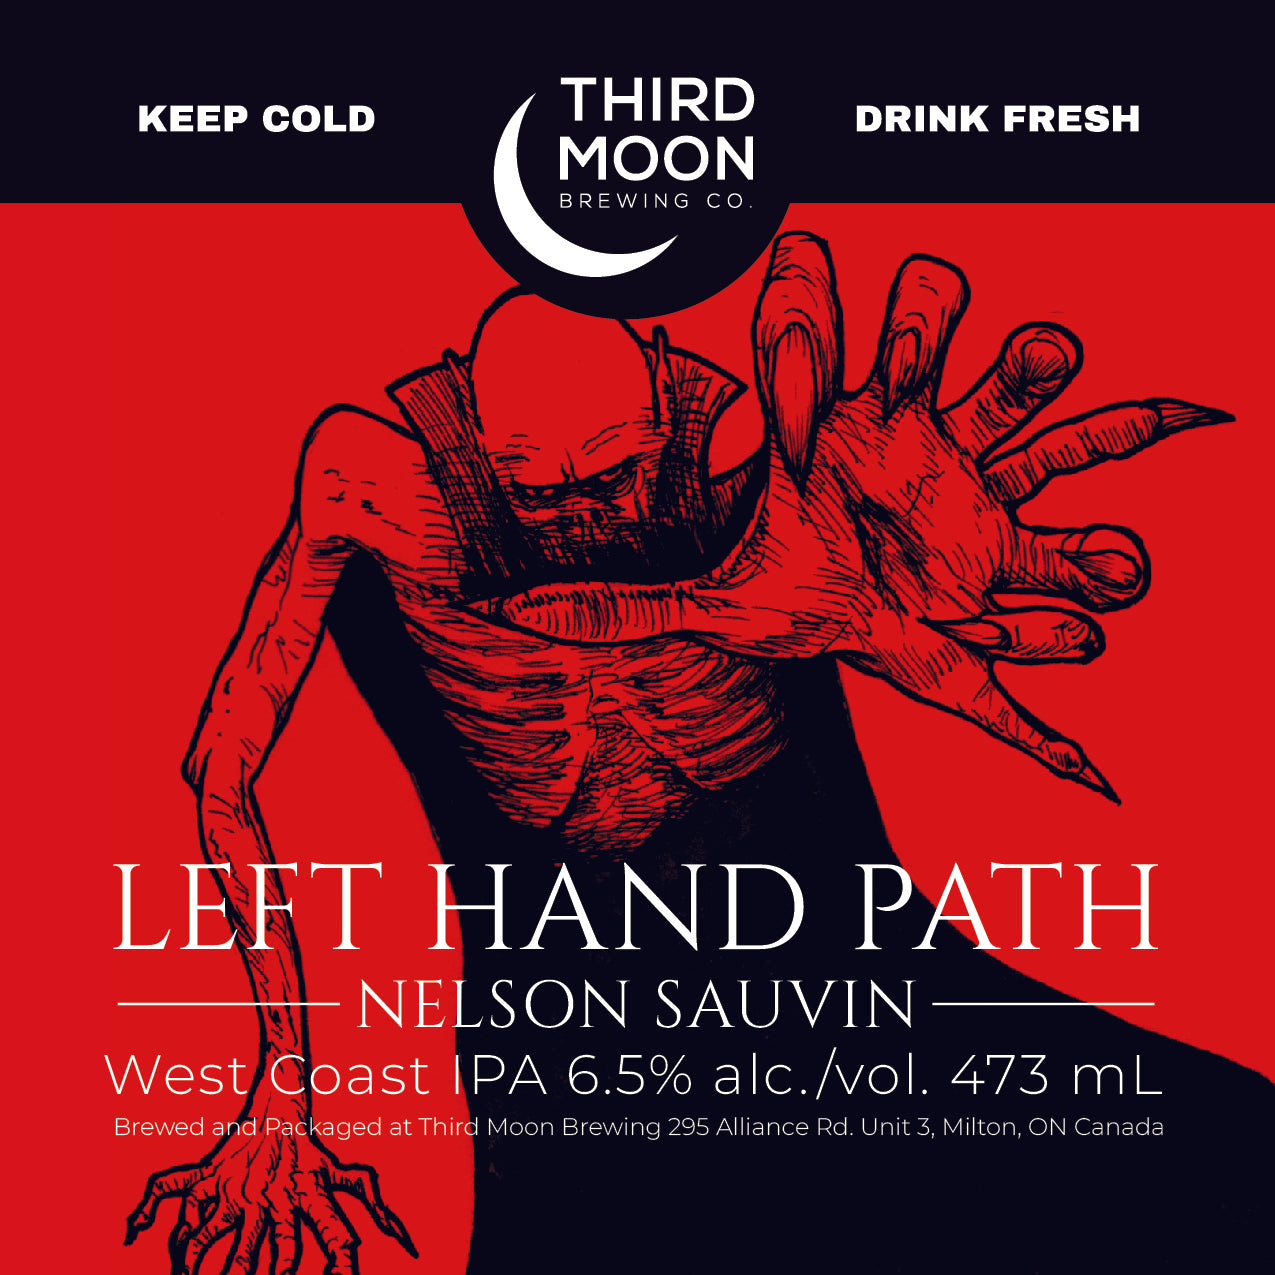 West Coast IPA - 4-pk of "Left Hand Path (Nelson Sauvin)" tall cans